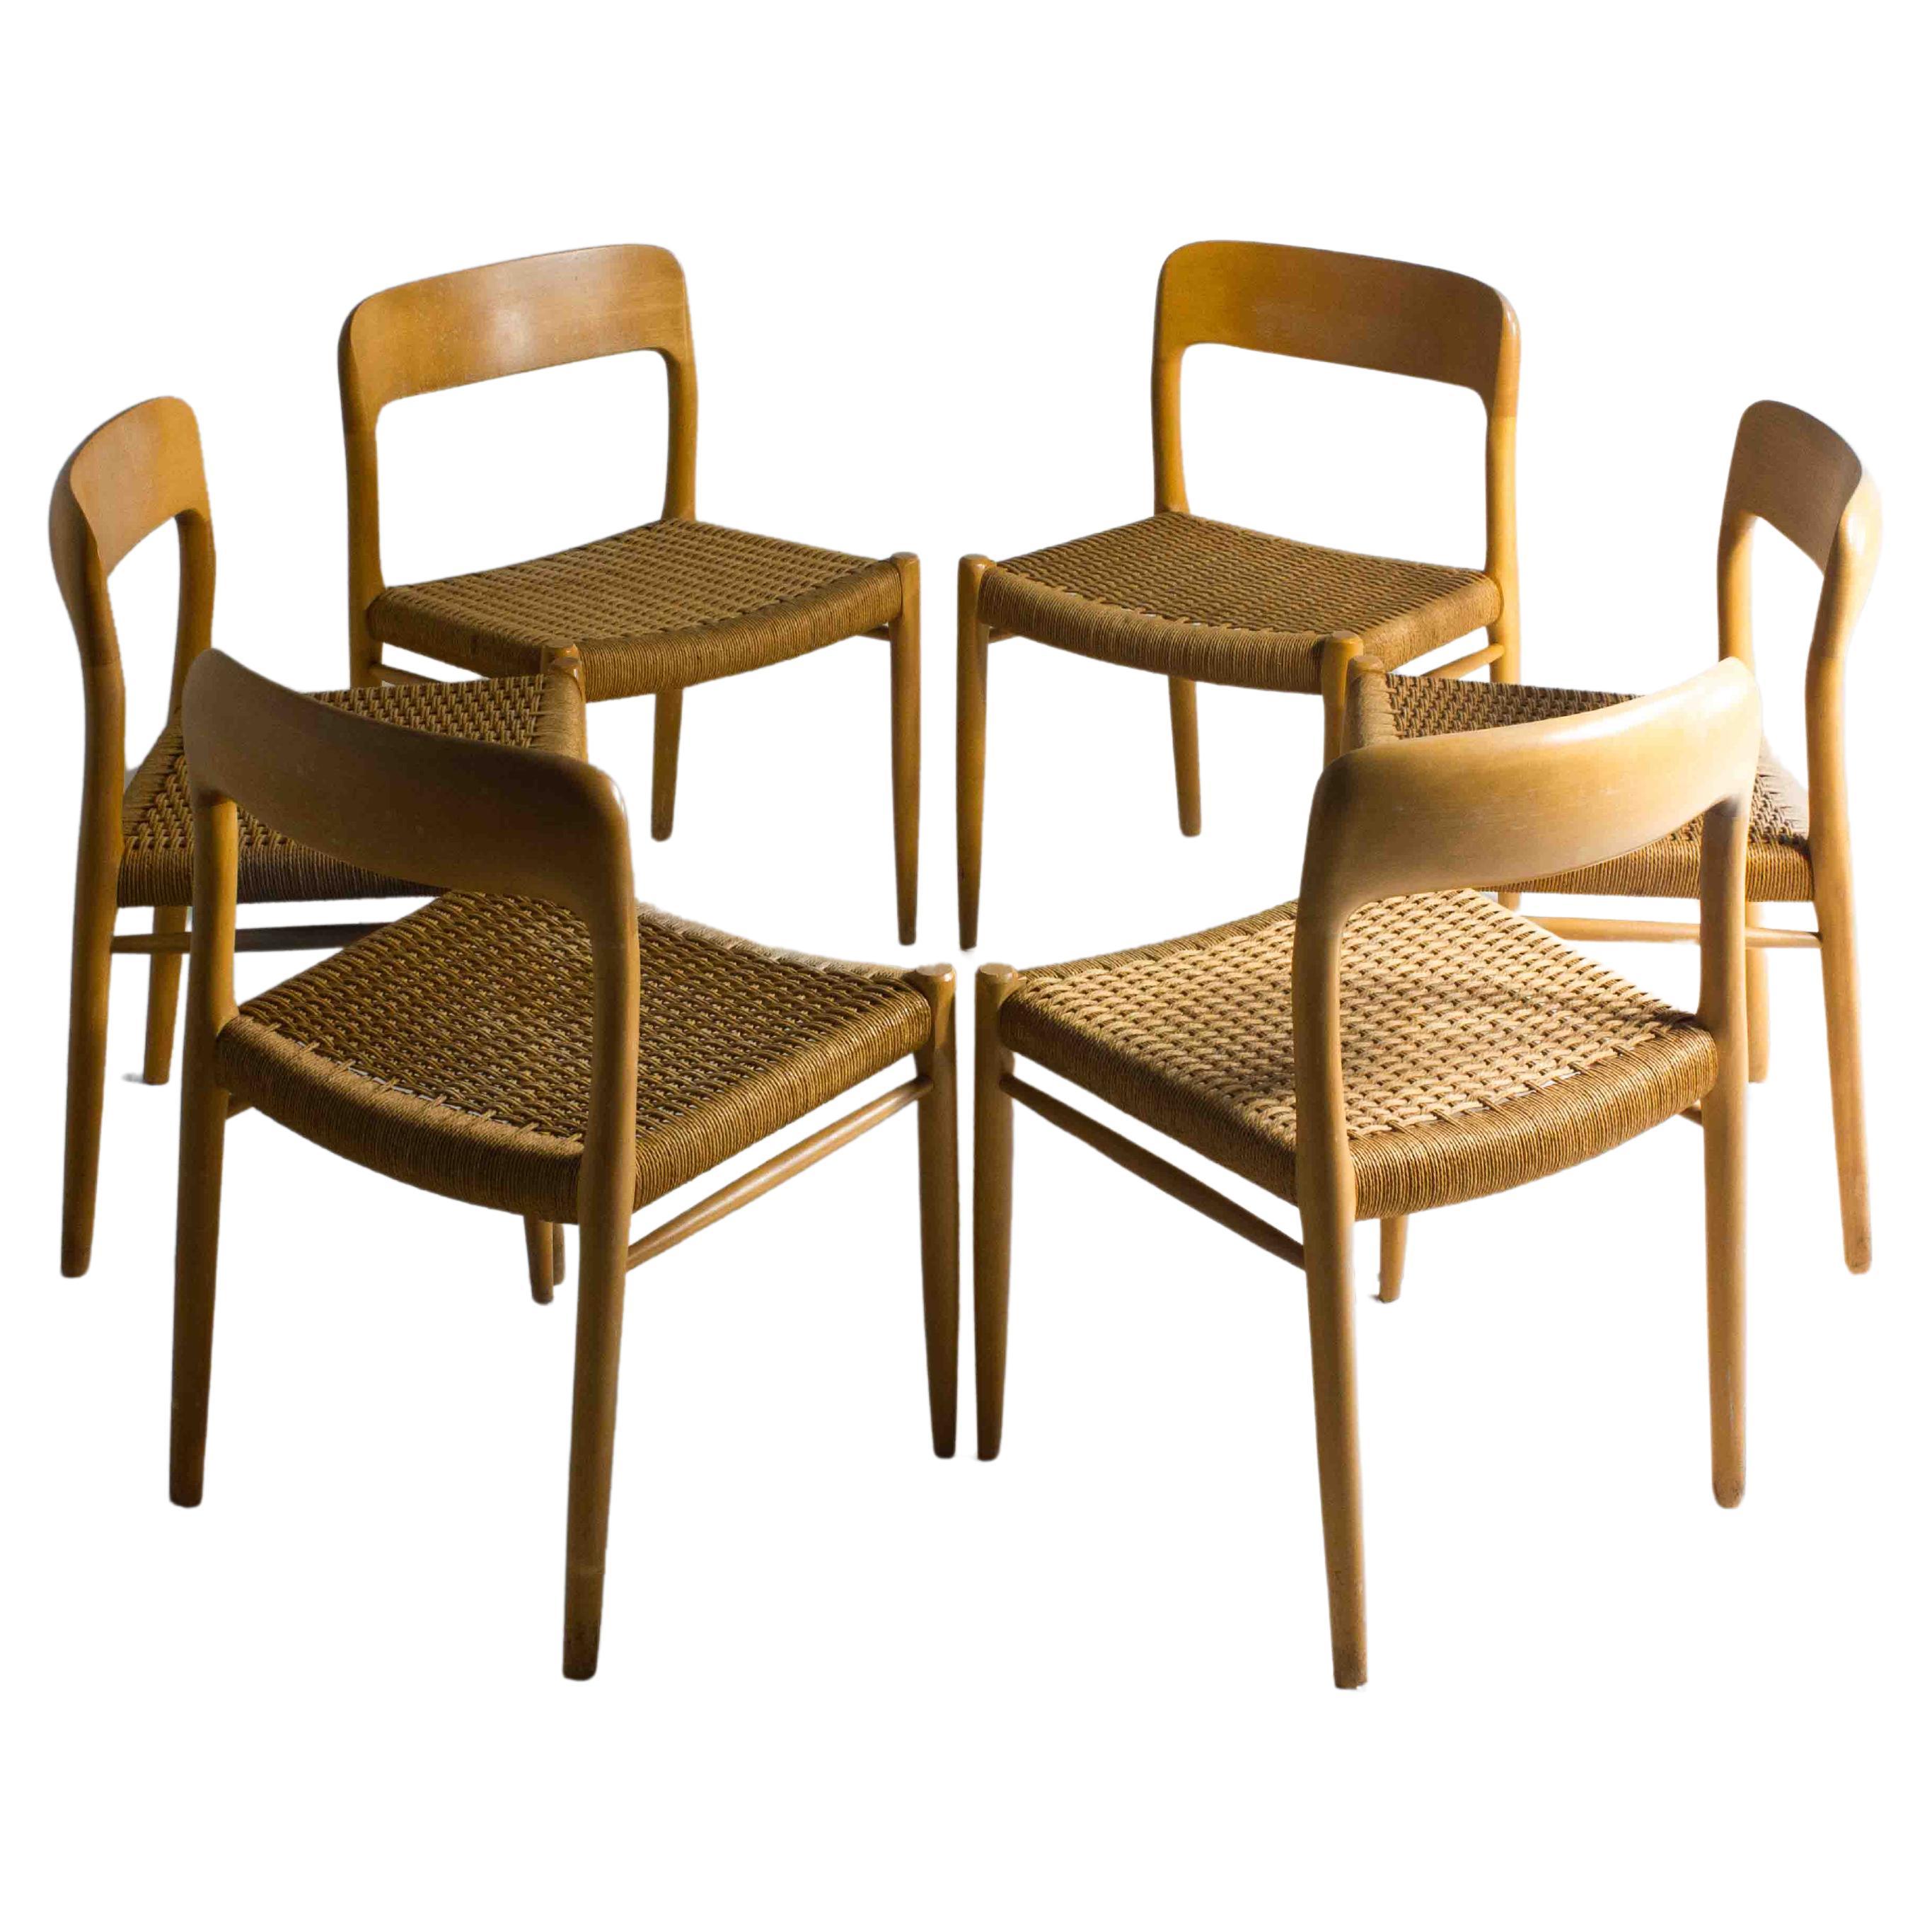 Set of 6 Mid-century J.L. Moller Model 75 Solid oak Dining Chairs, Denmark 1960s For Sale